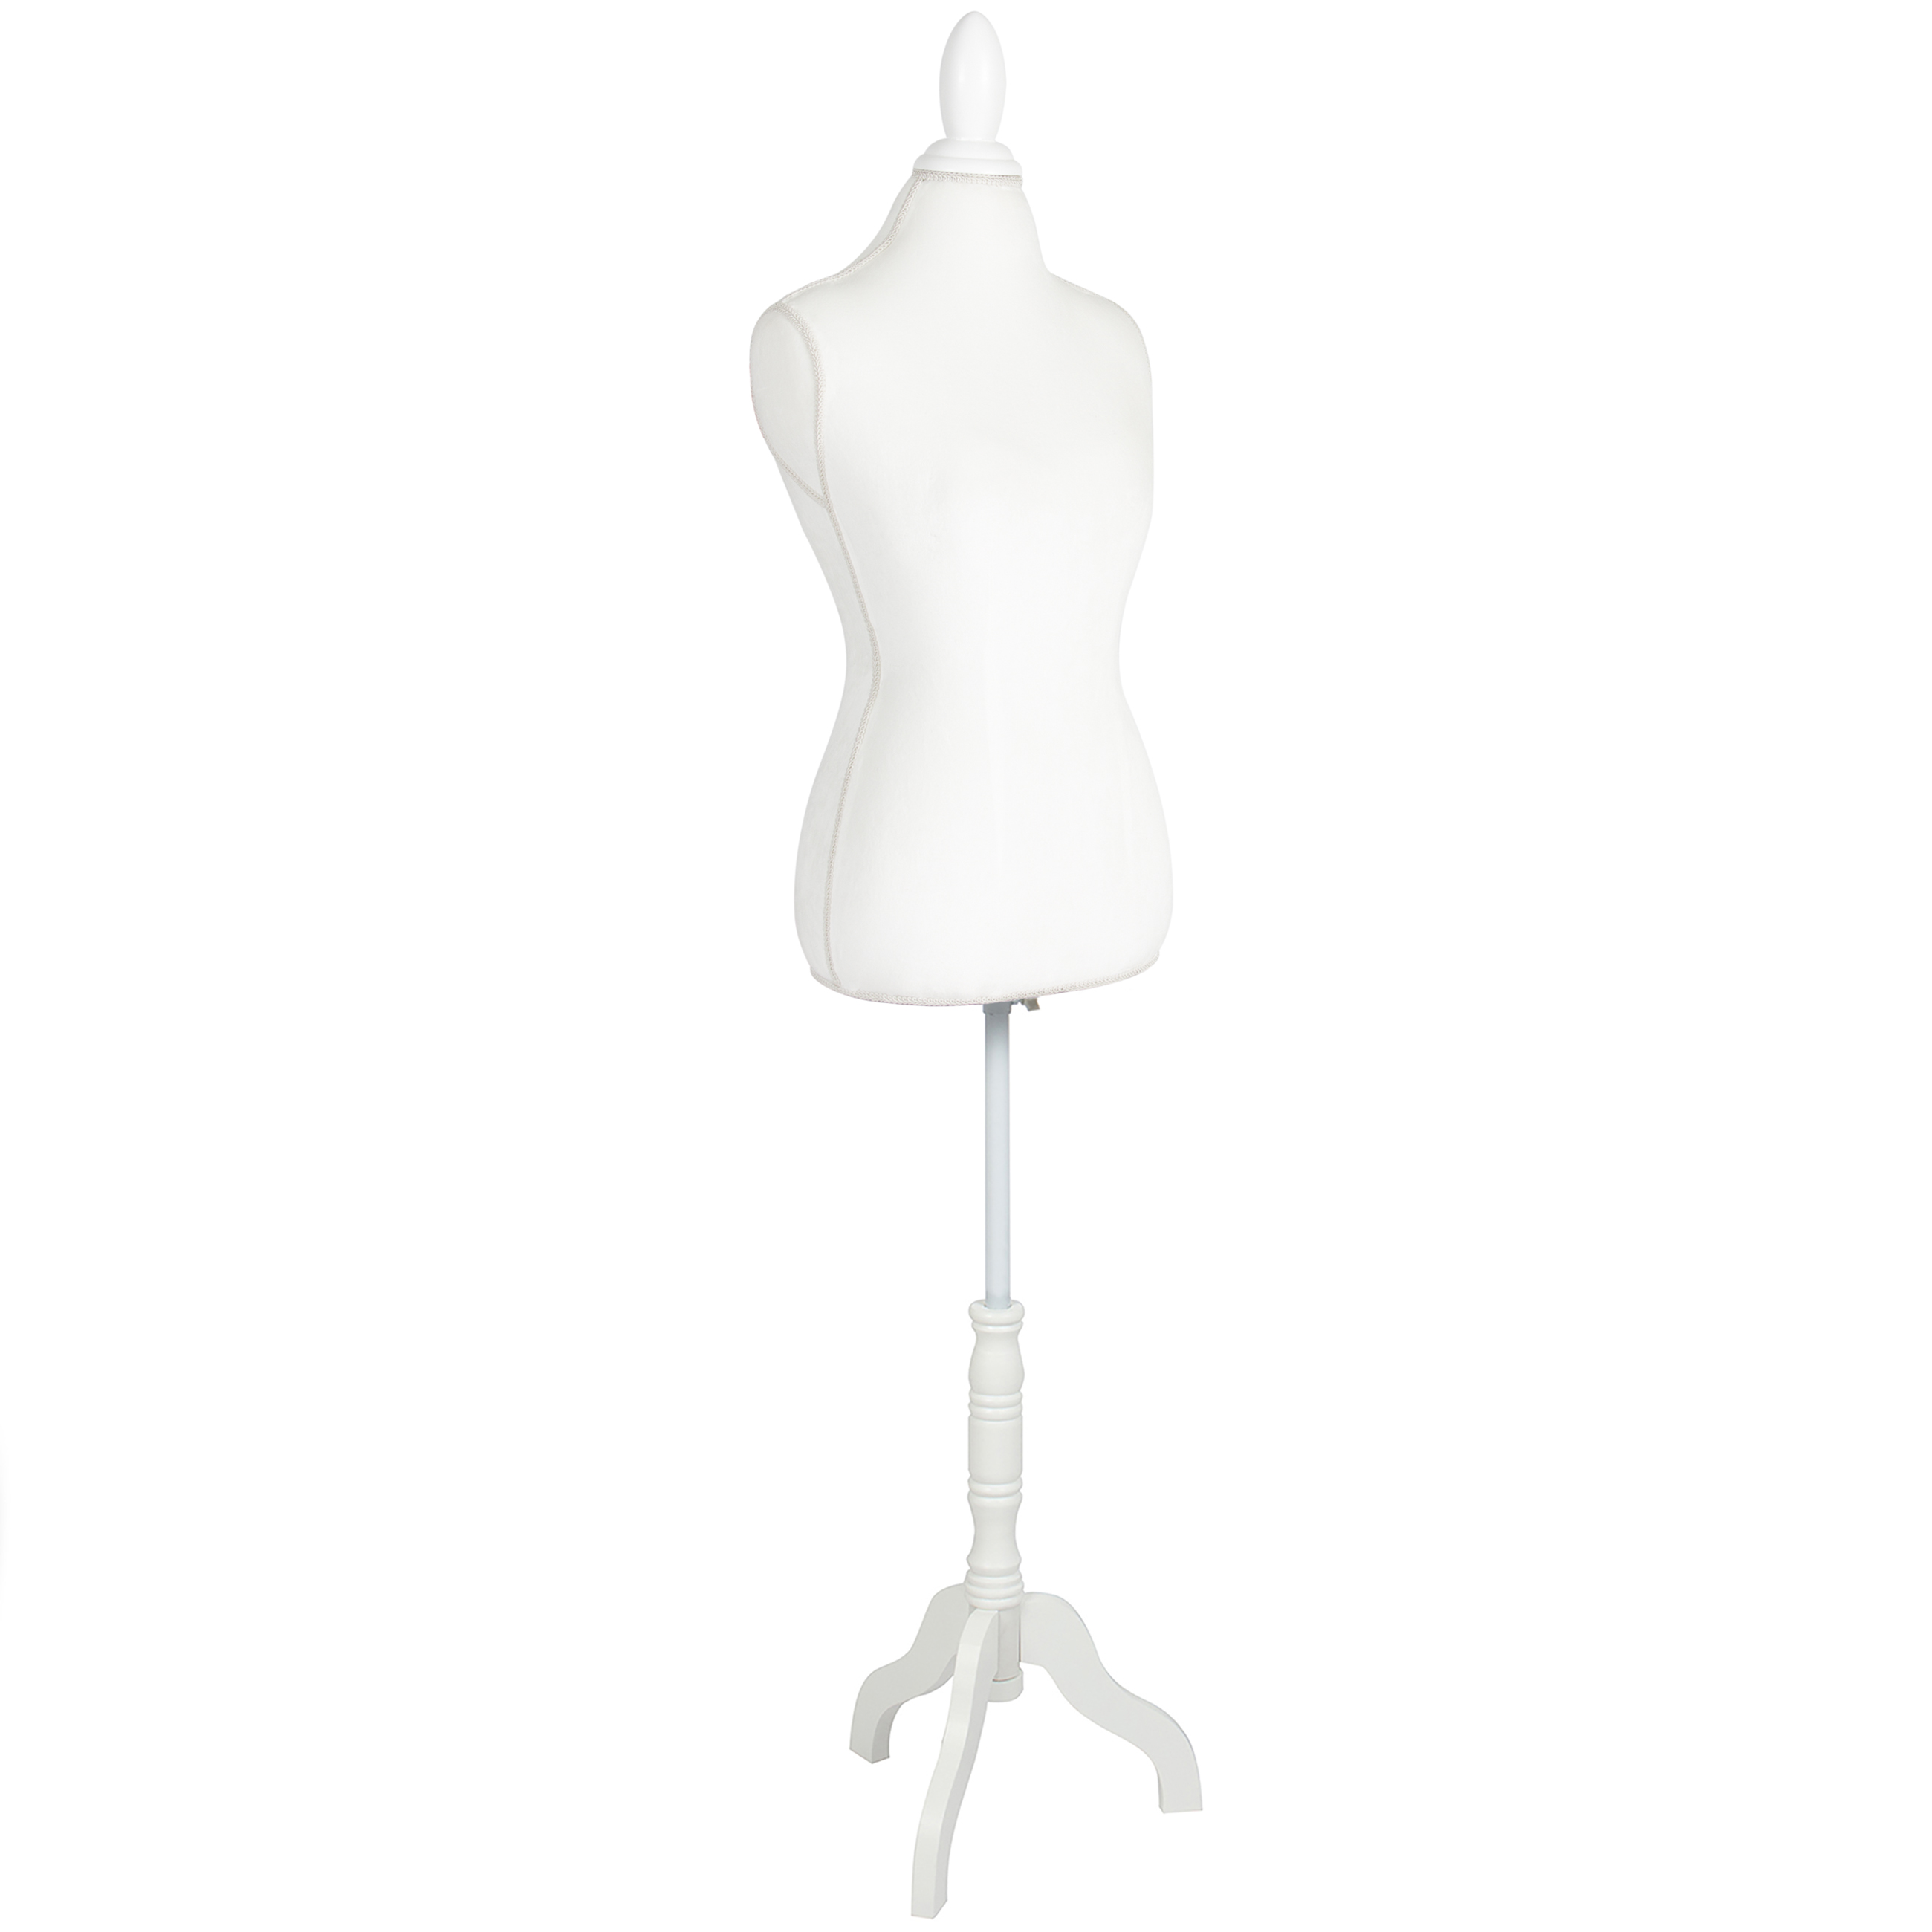 Best Choice Products Female Mannequin Torso Display w/ Wooden Tripod ...